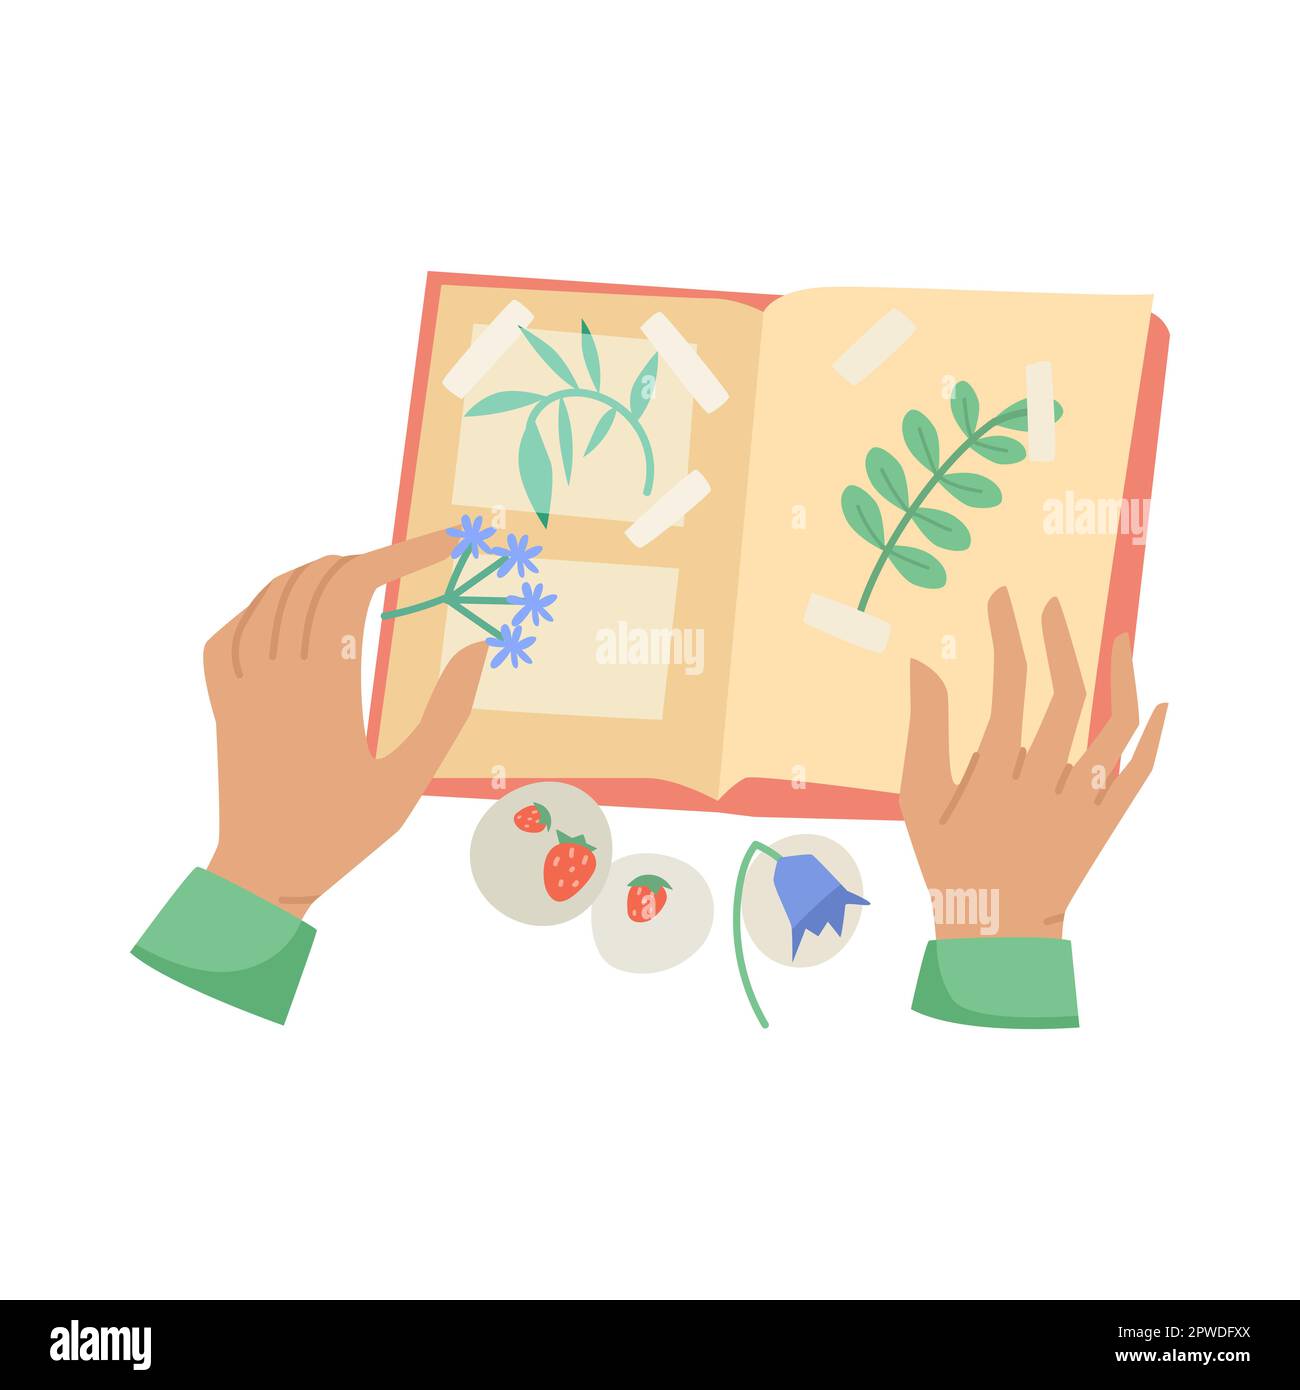 Hands of person with plants and scrapbook vector illustration Stock Vector